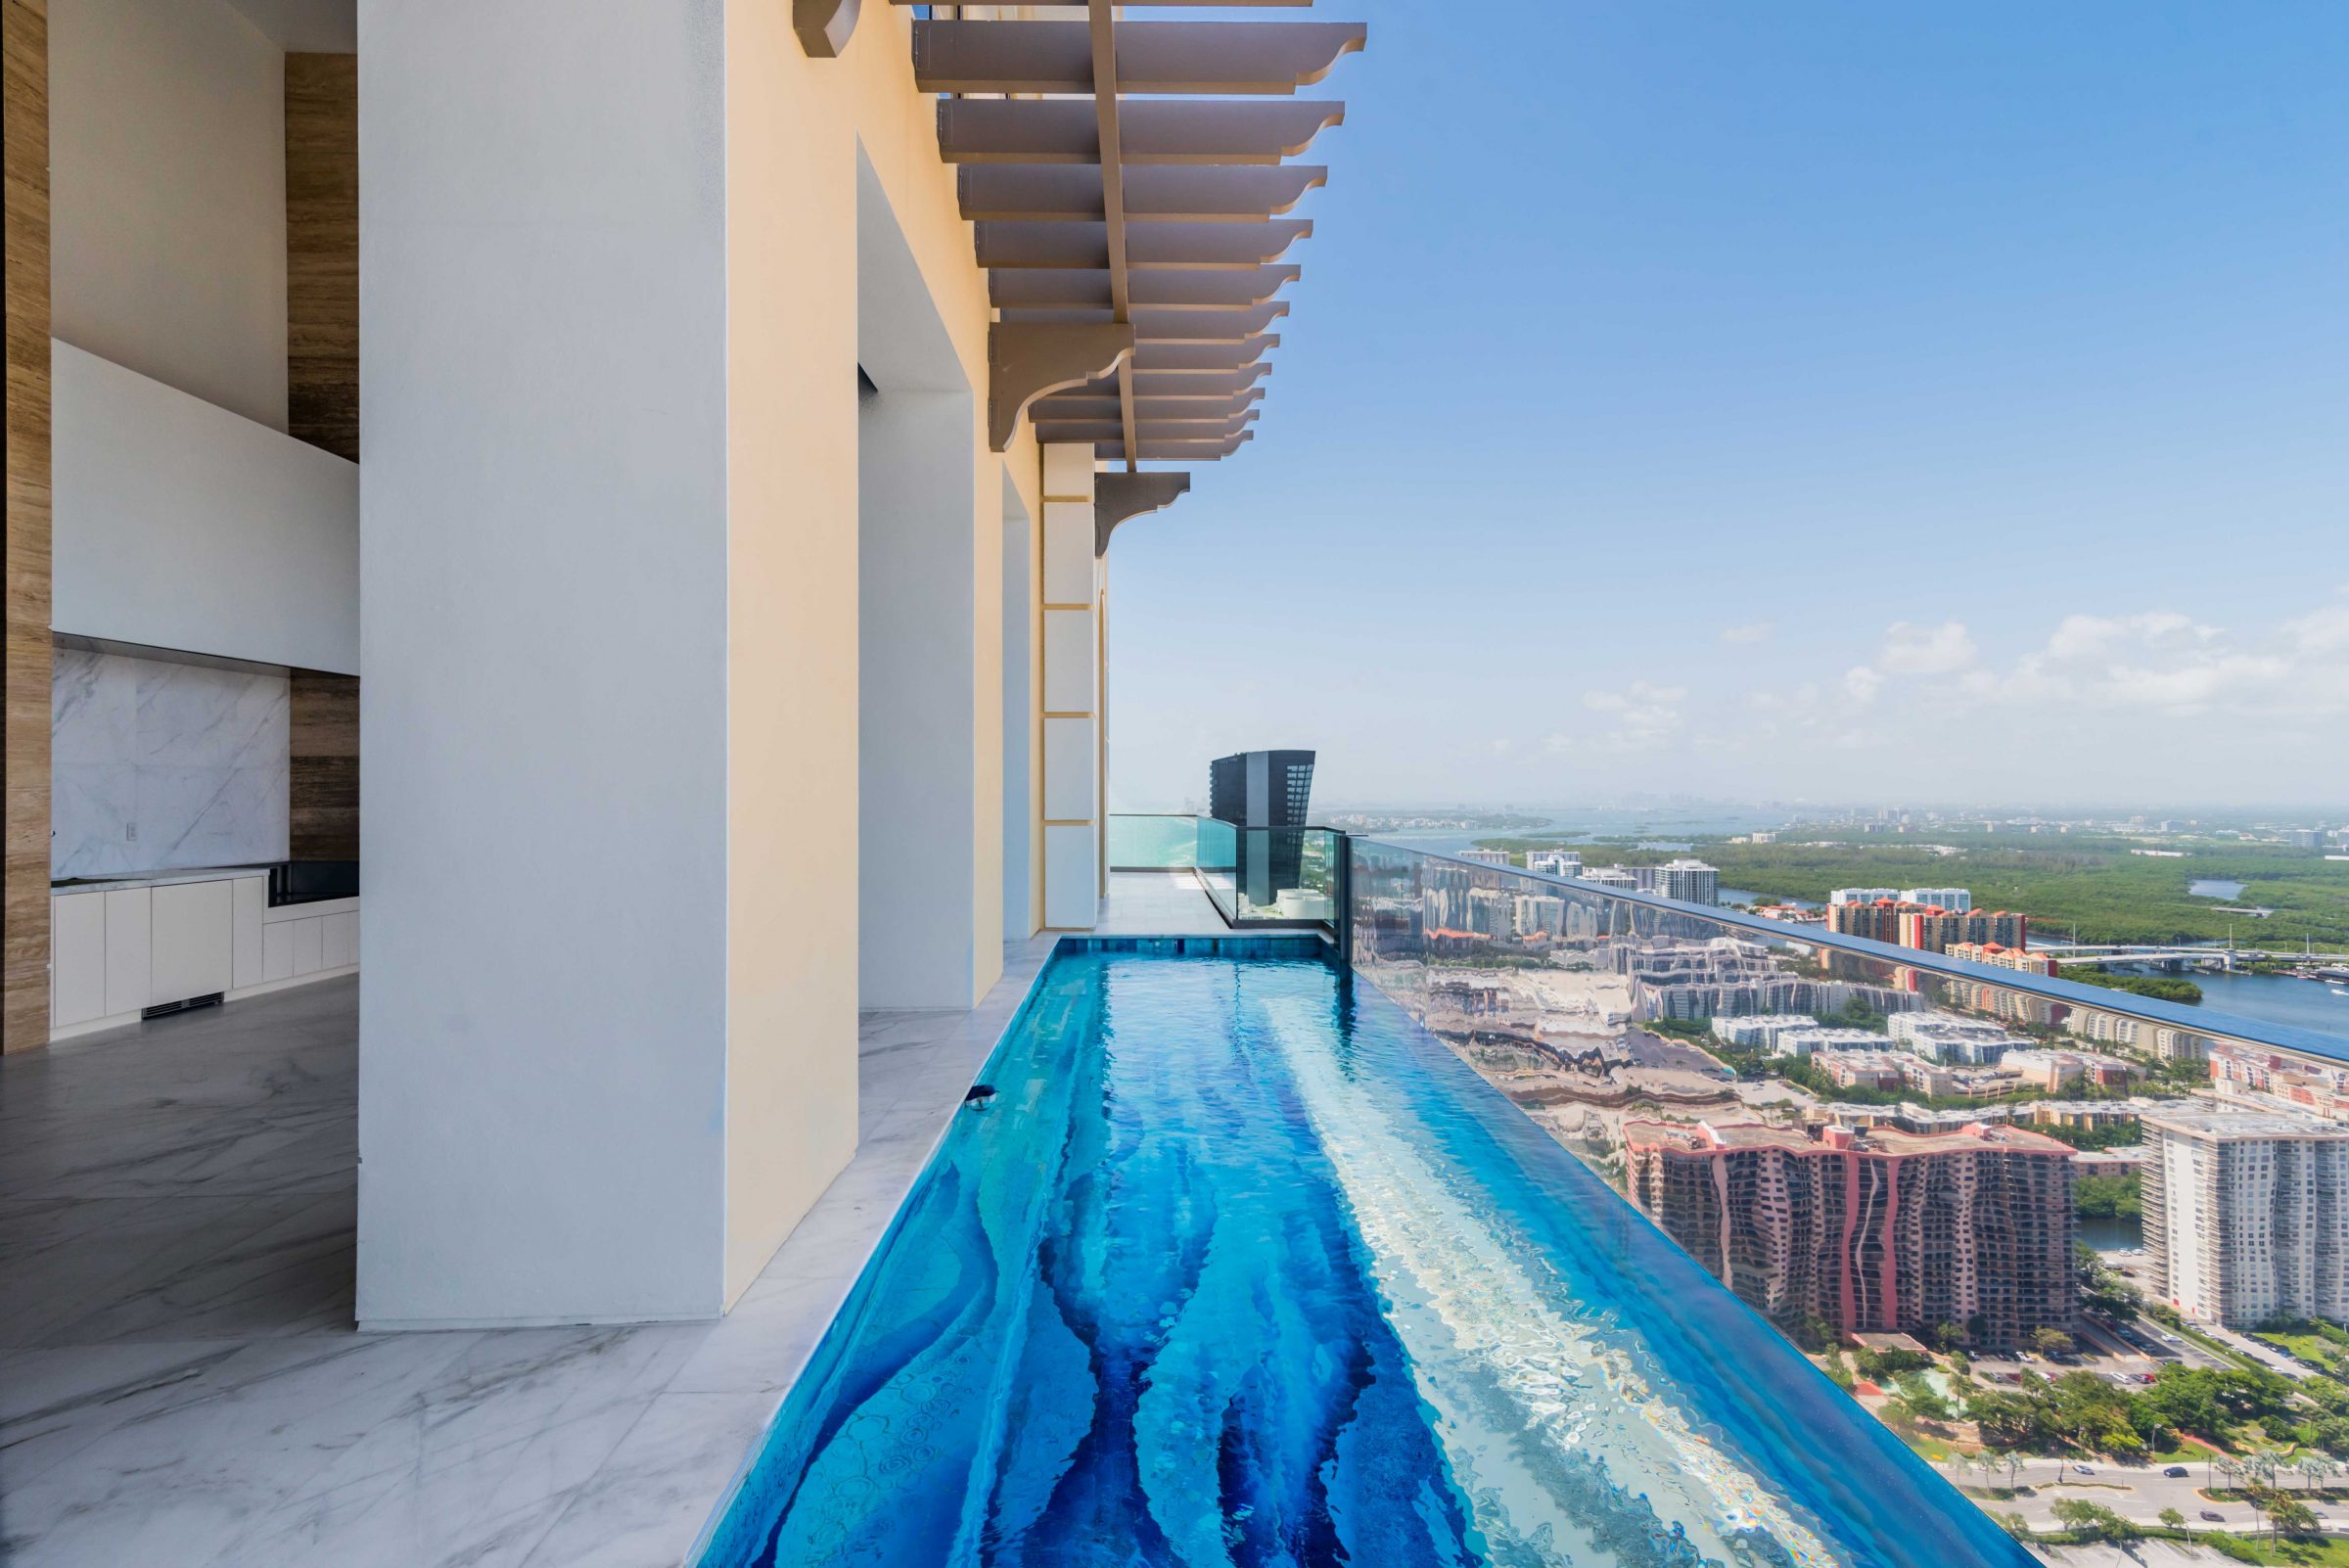 Living Large Sky High Luxury Penthouse Features Cantilevered Pool